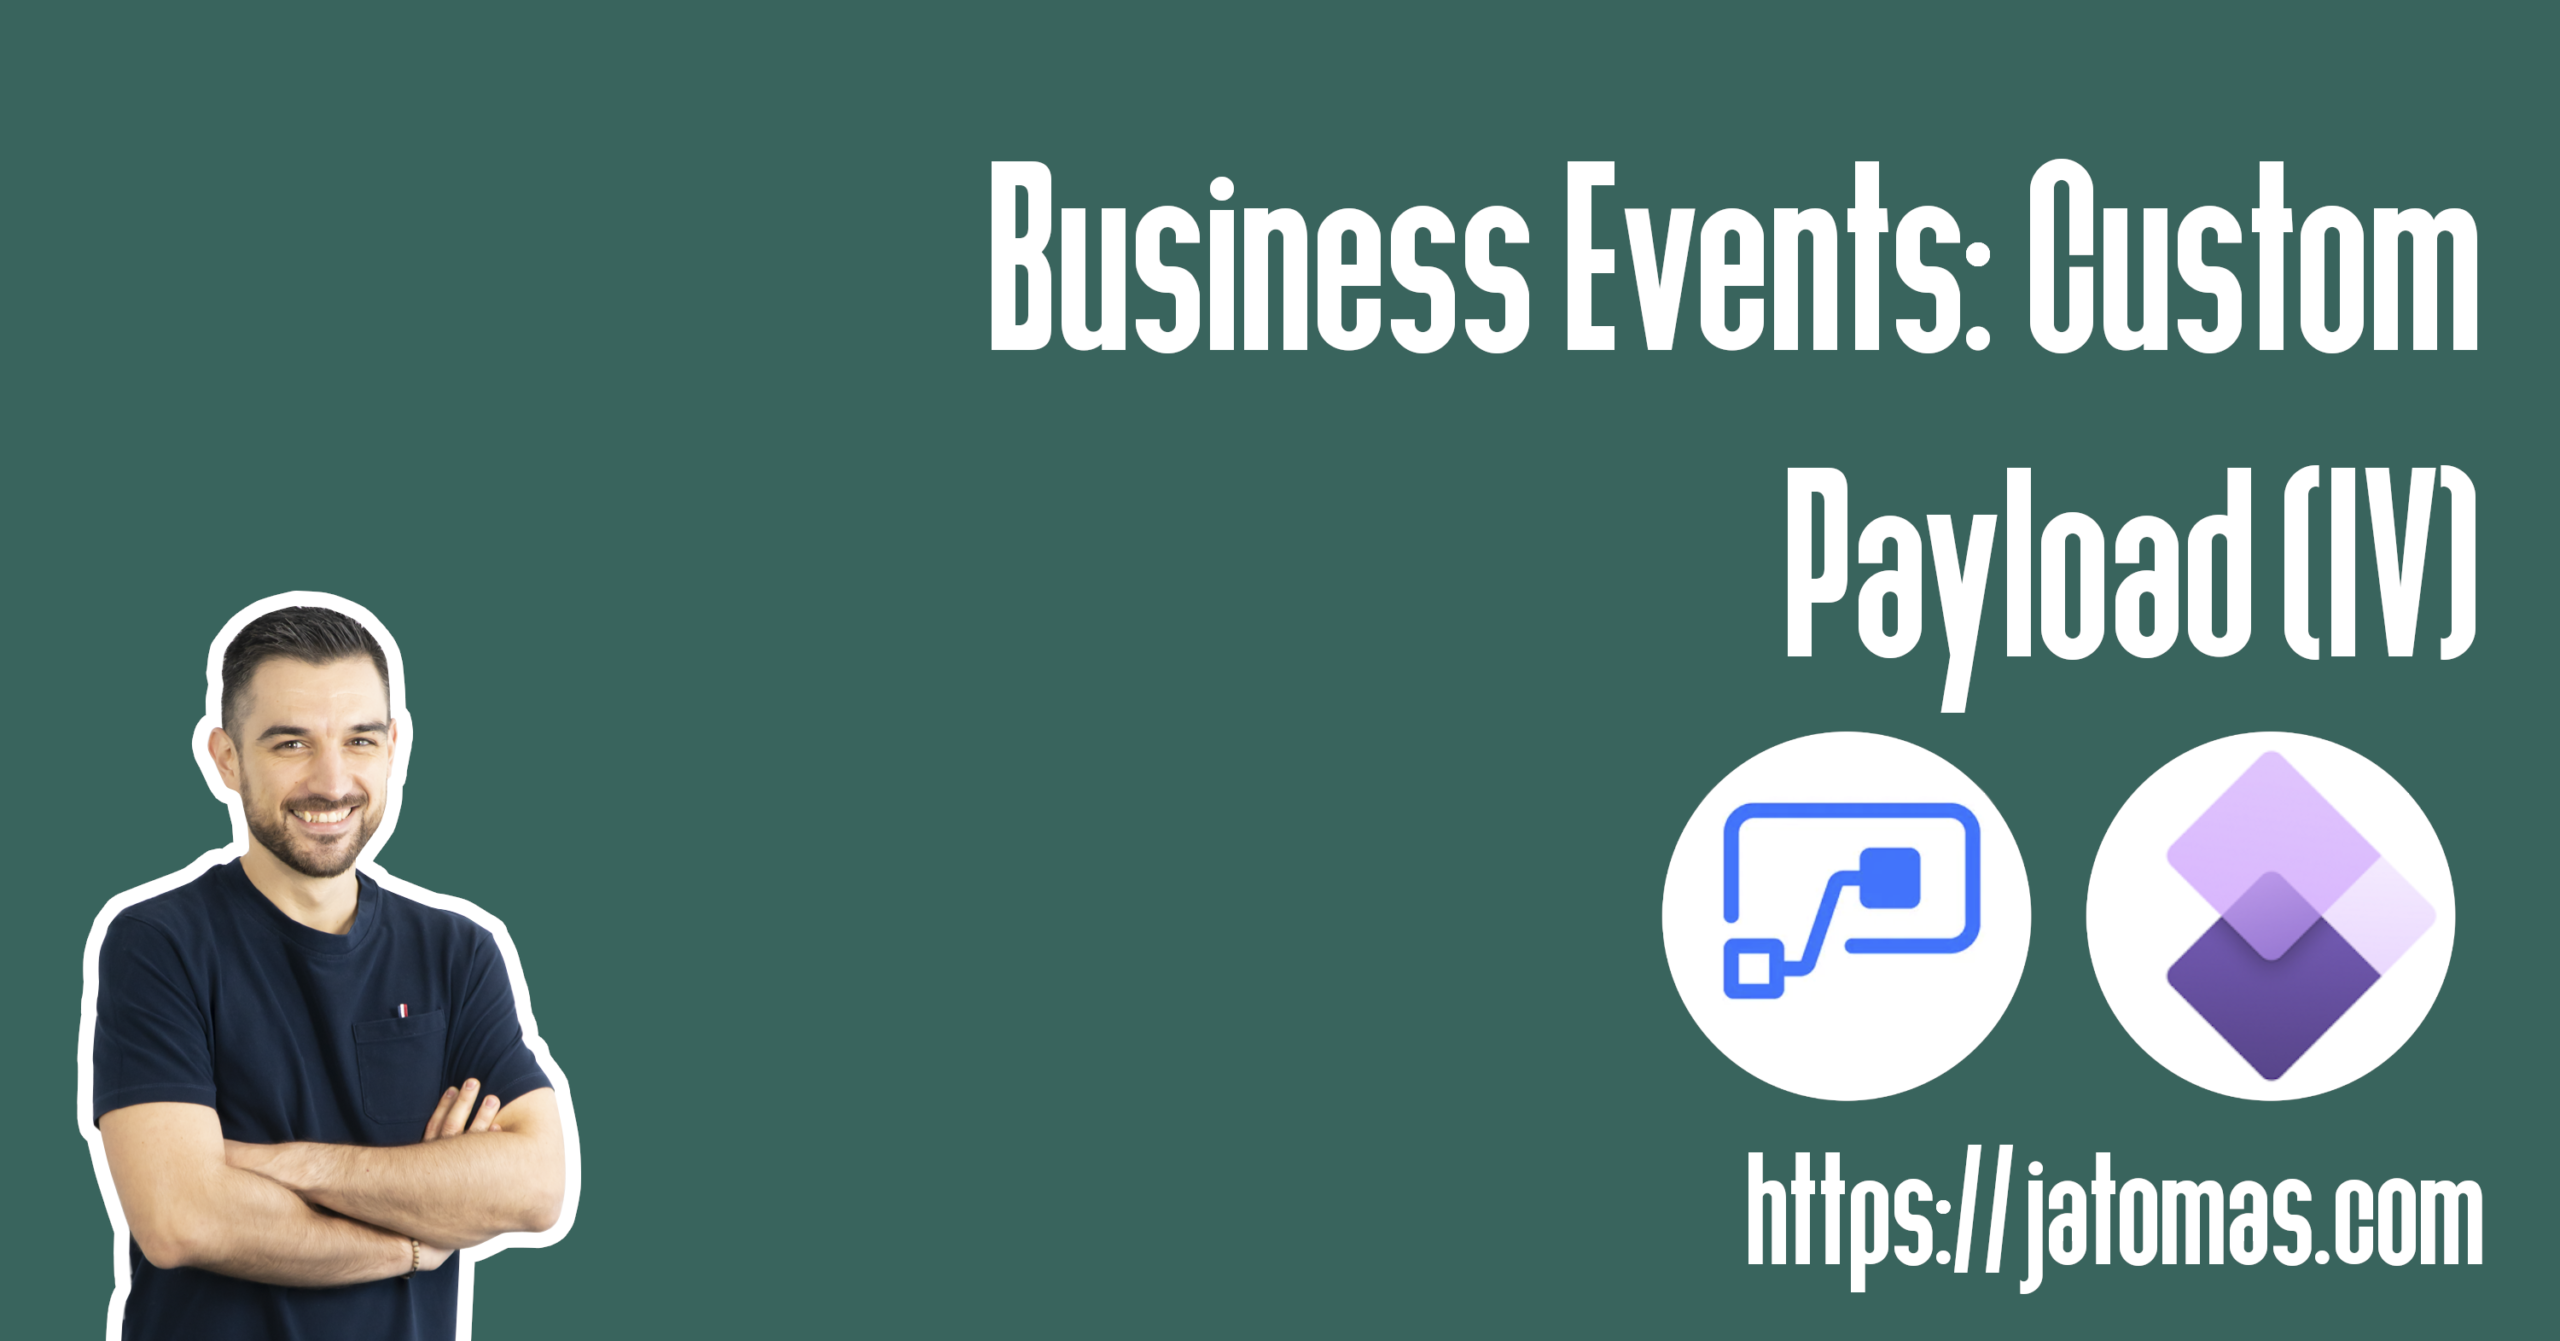 Business Events: Custom Payload (IV)